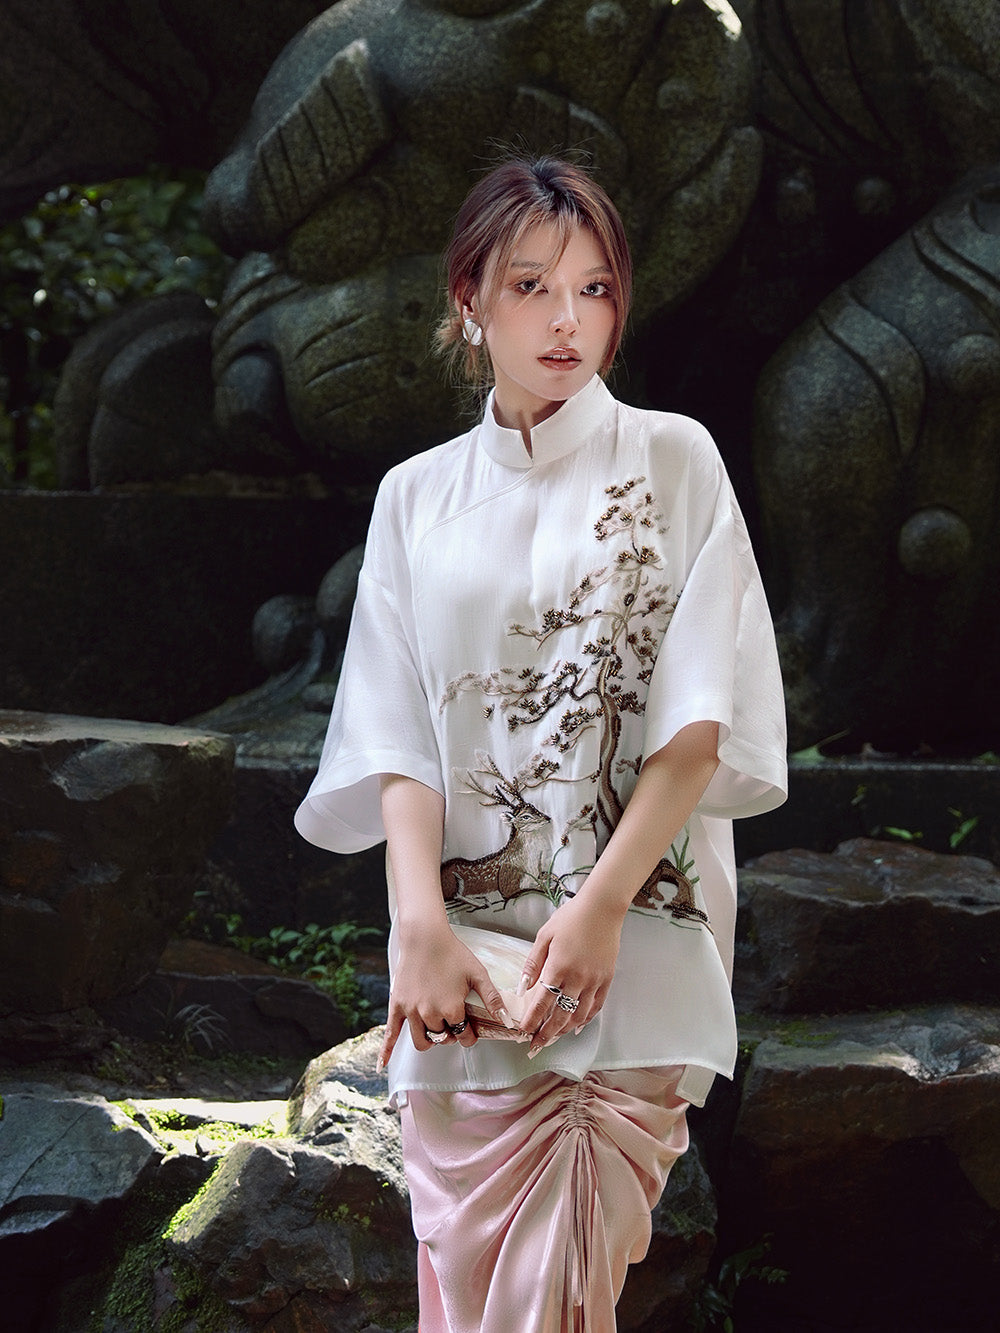 MUKZIN White Chinese Embroidery Mid-sleeve Loose Shirt